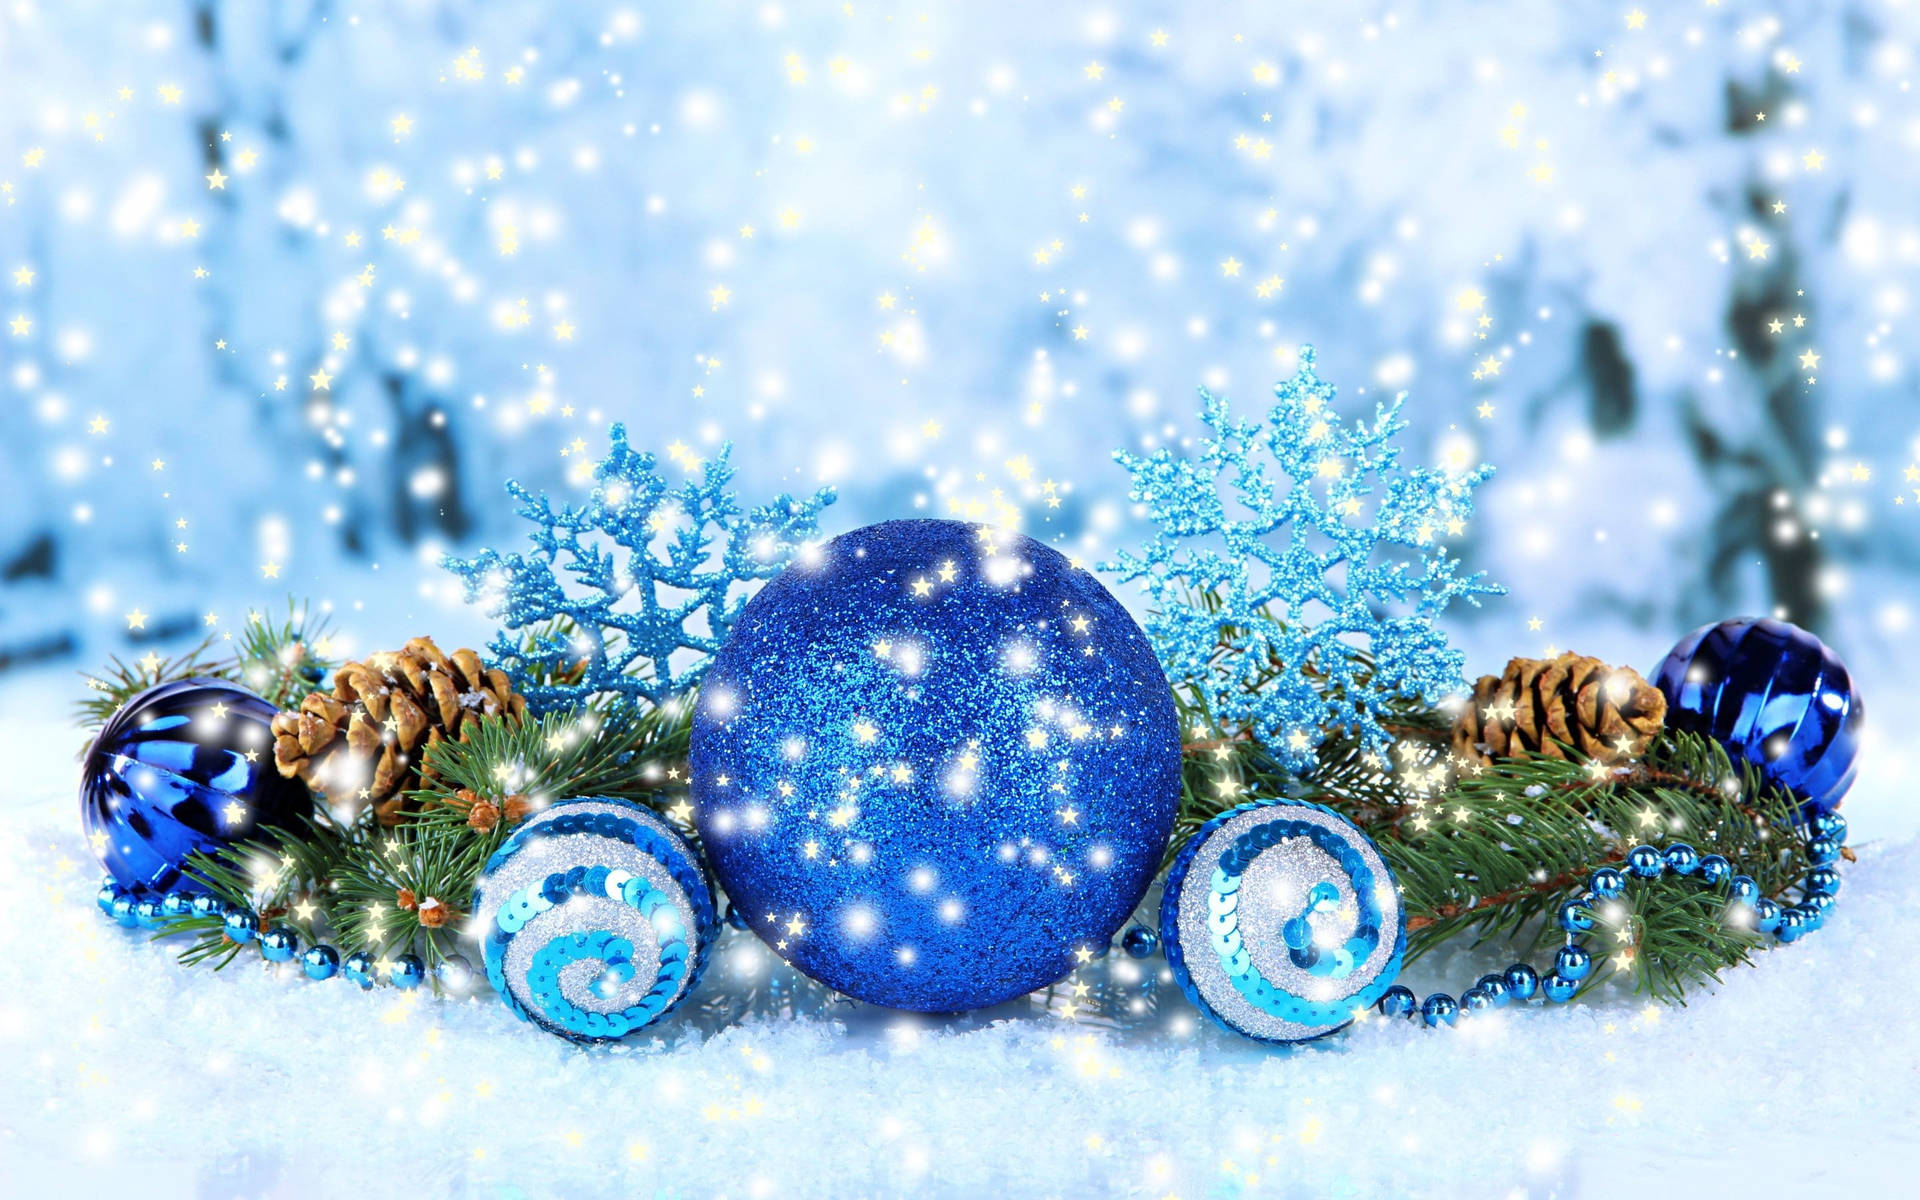 Blue Christmas Balls With Snowflakes Wallpaper